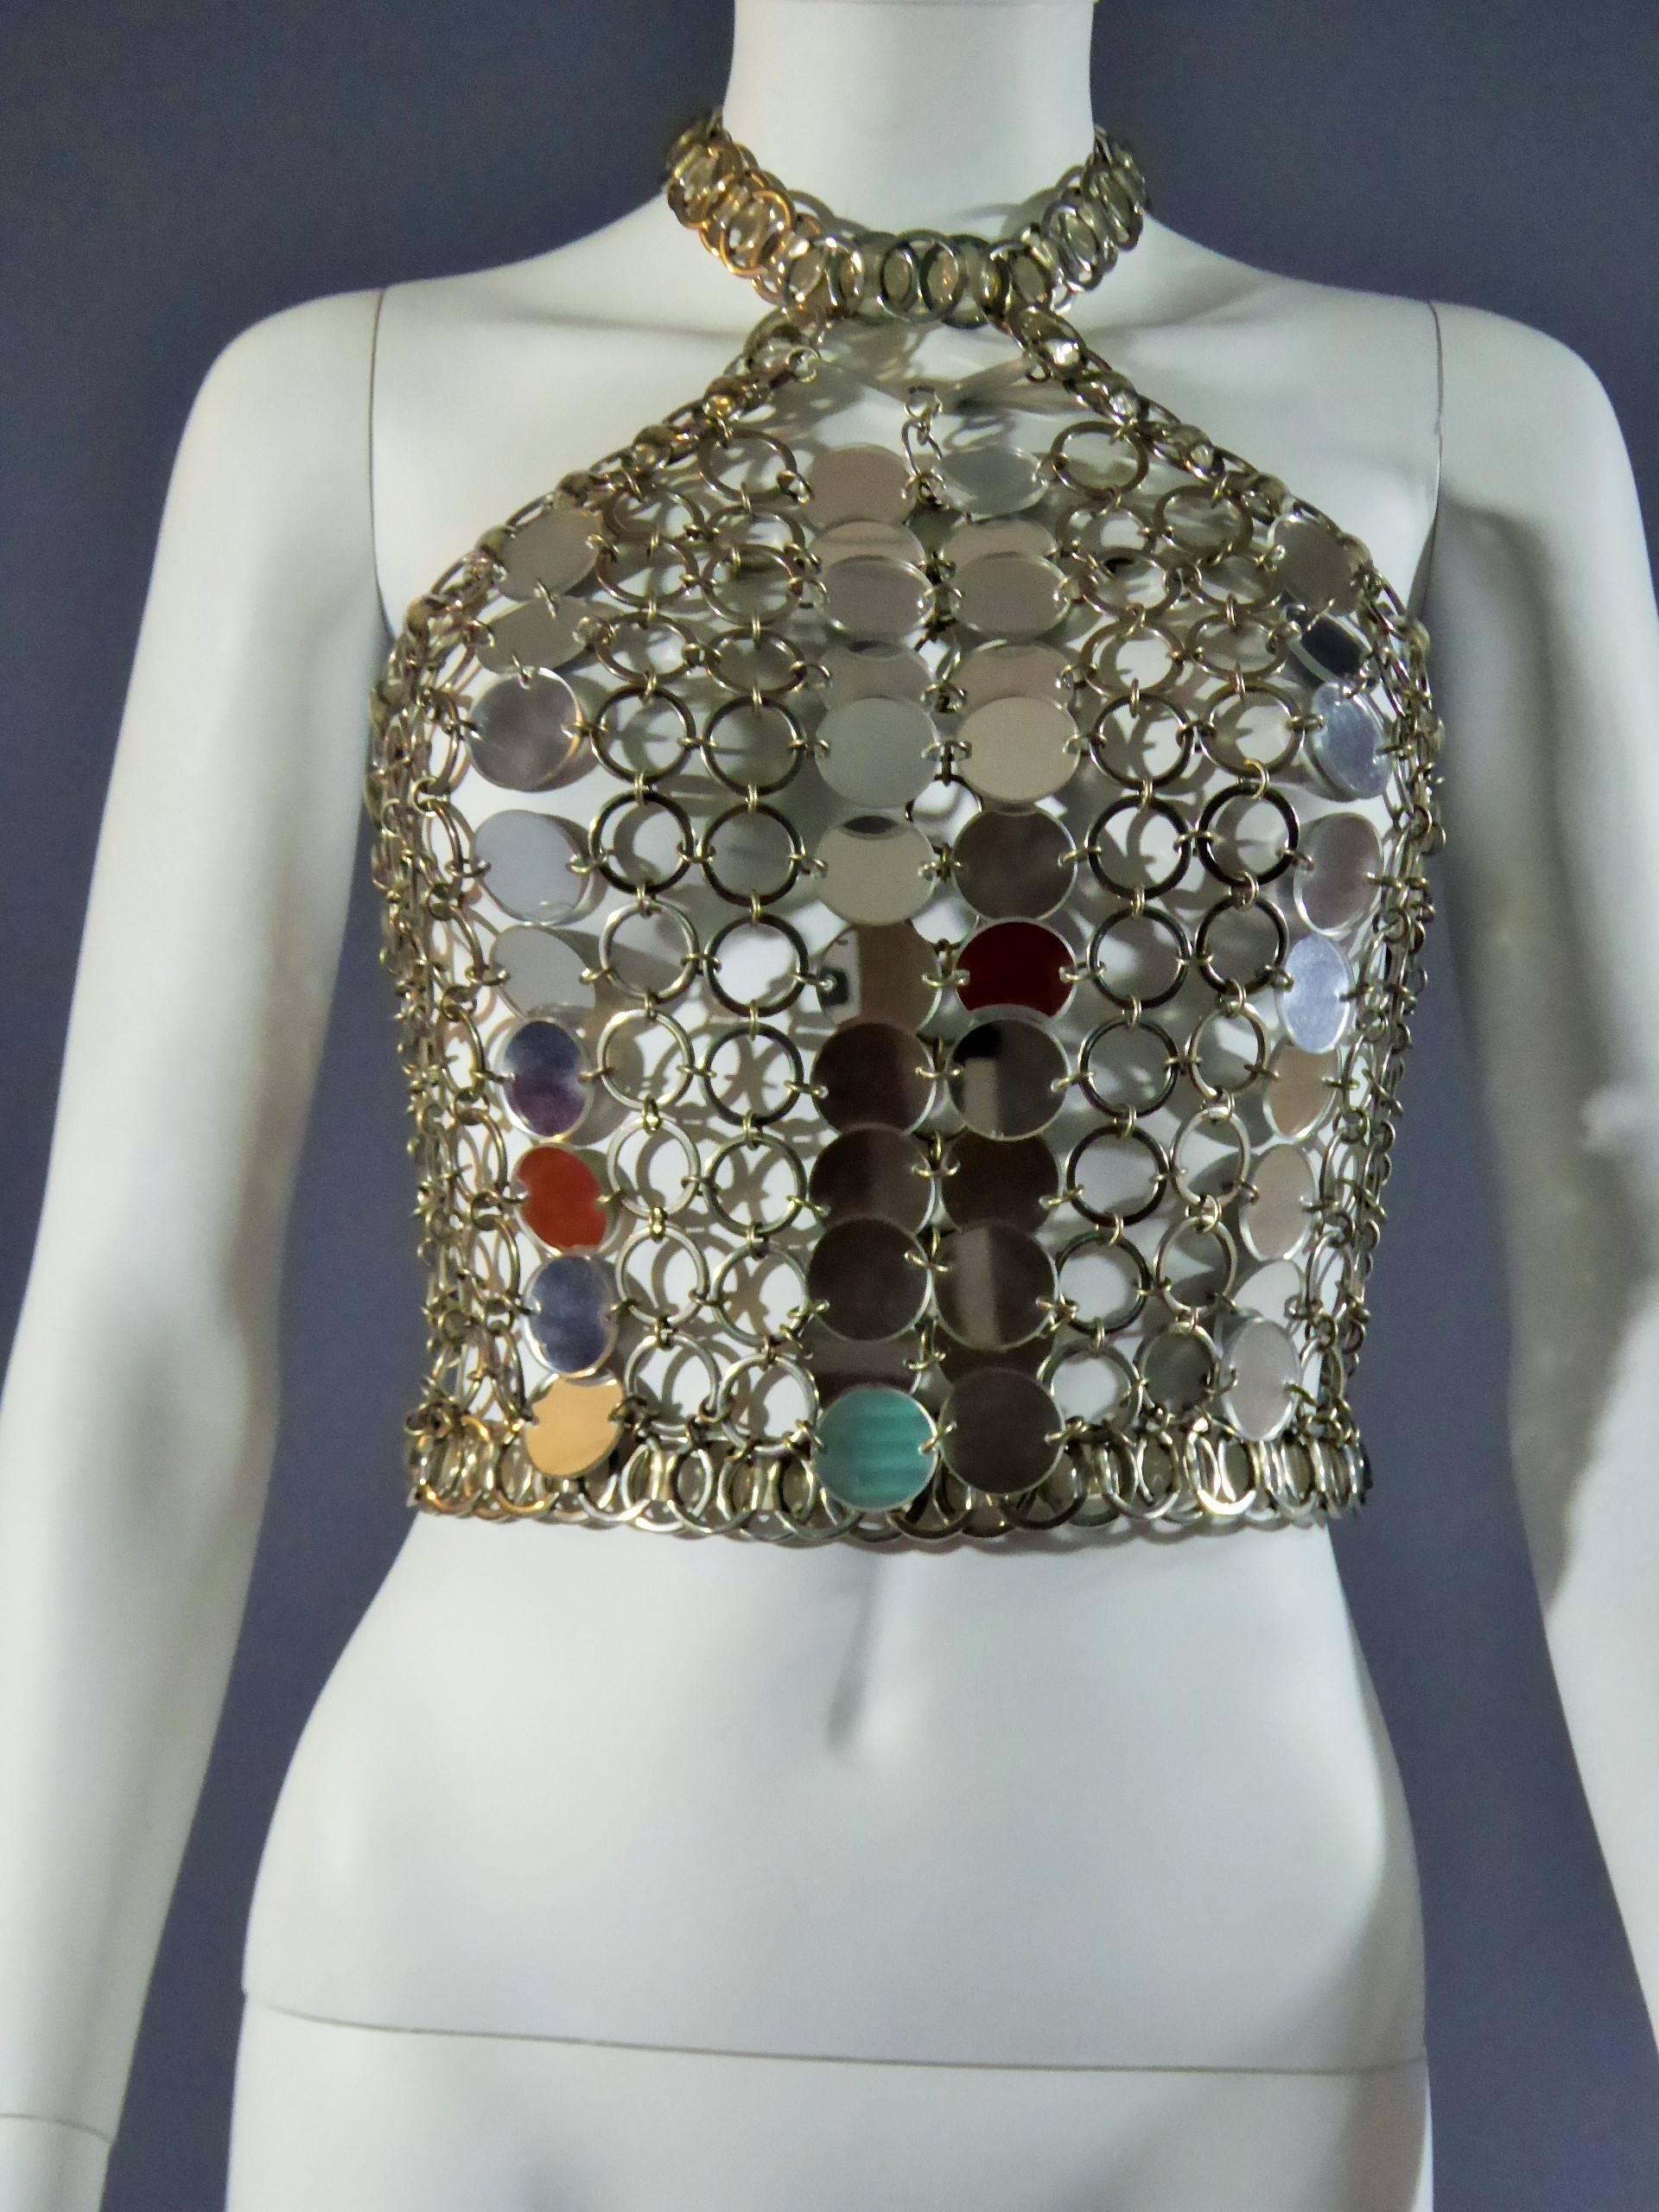 Circa 1970

Paris

Paco Rabanne Top from the first period of creation of the designer With Paco Rabanne label at the neck. Metal rings mesh, small disk mirroring and tape transparent rigid vinyl. Topless Scoop attached to a “collier de chien”